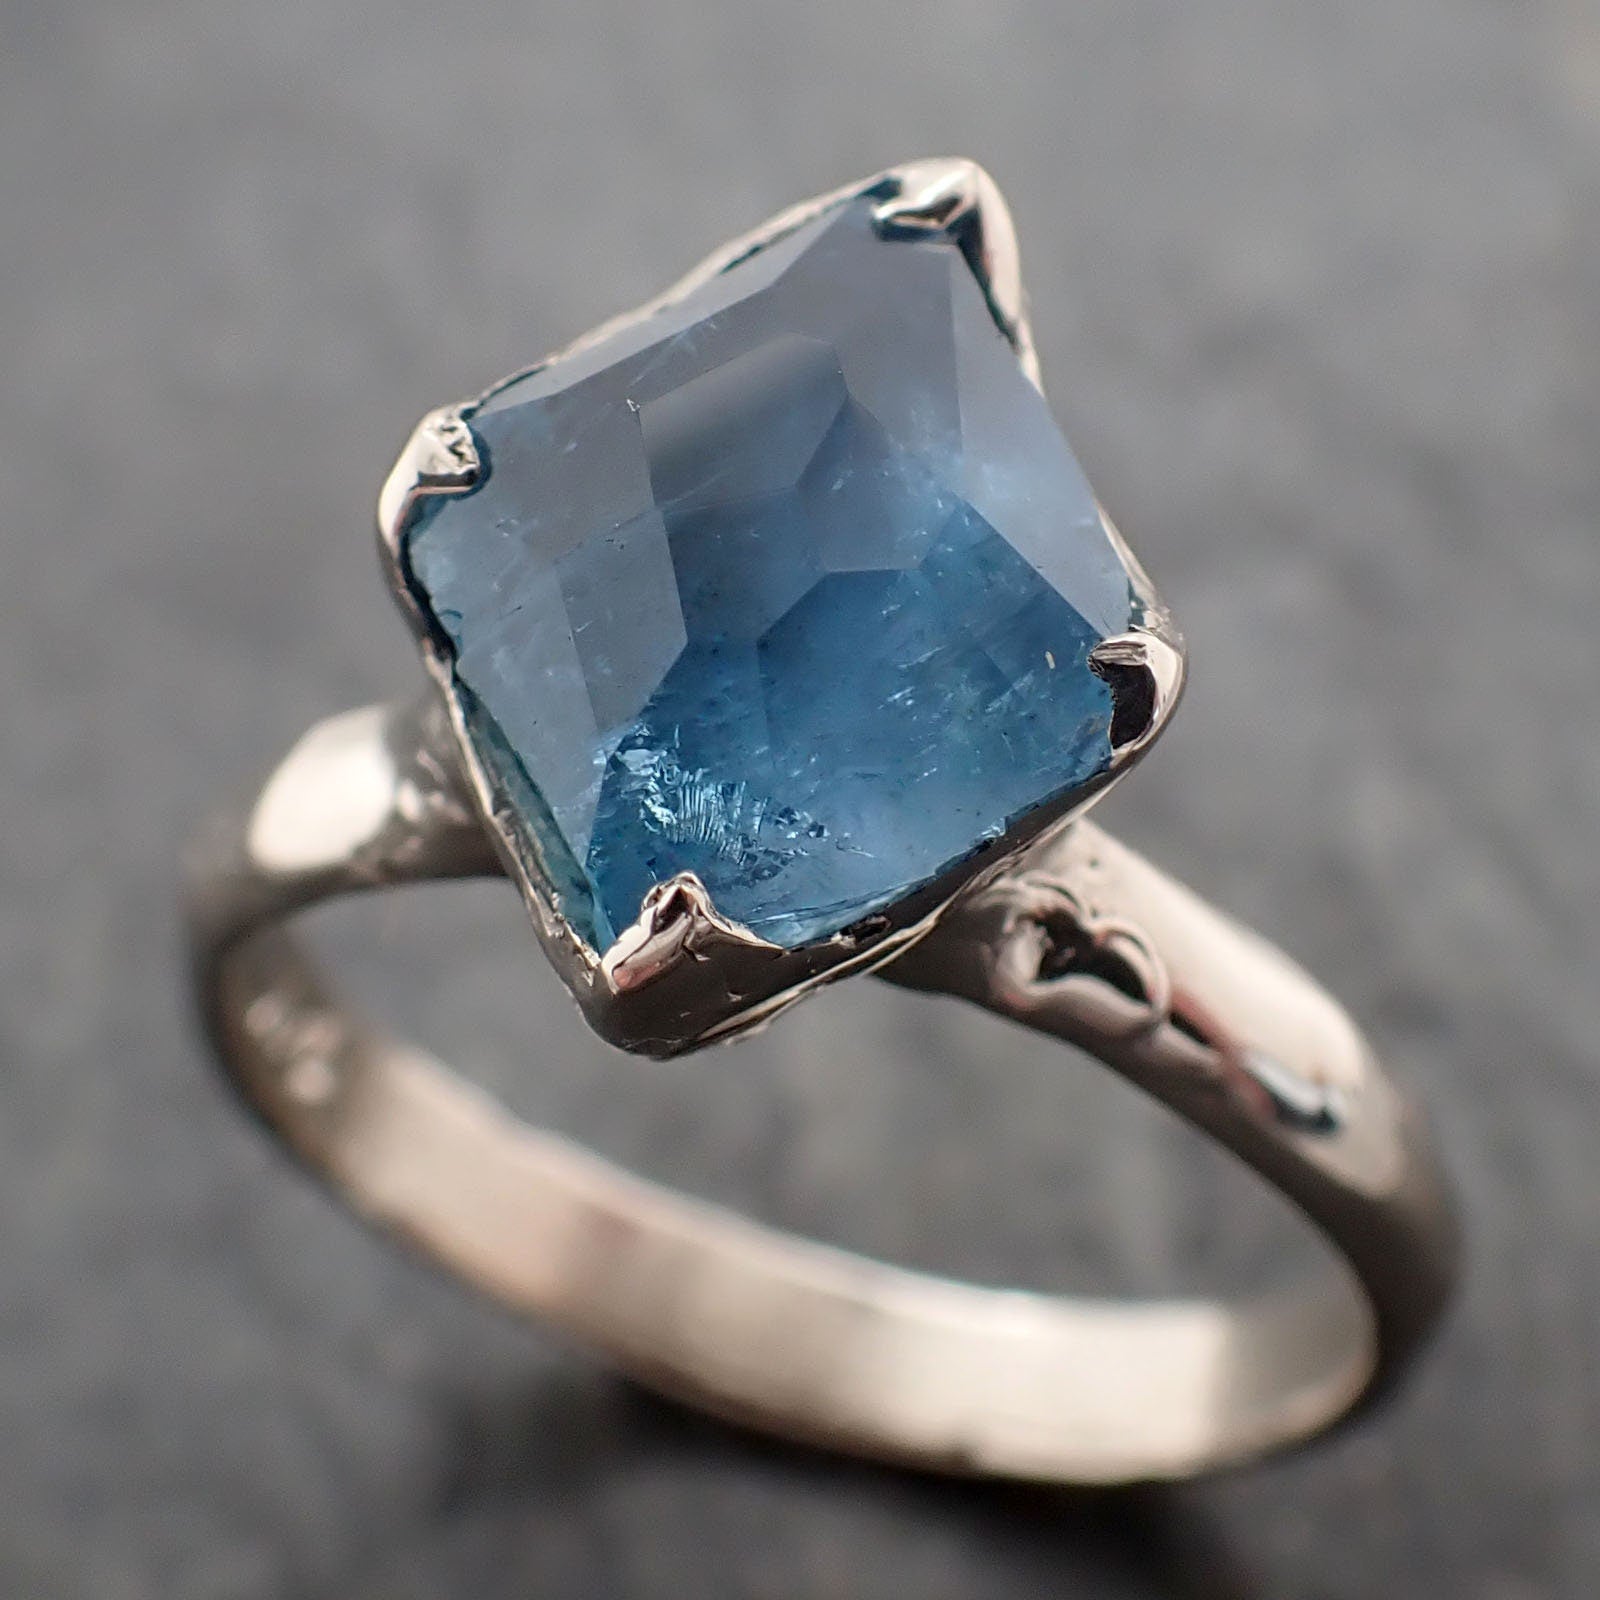 Partially faceted Aquamarine Solitaire Ring 14k gold Custom One Of a Kind Gemstone Ring Bespoke byAngeline 3260